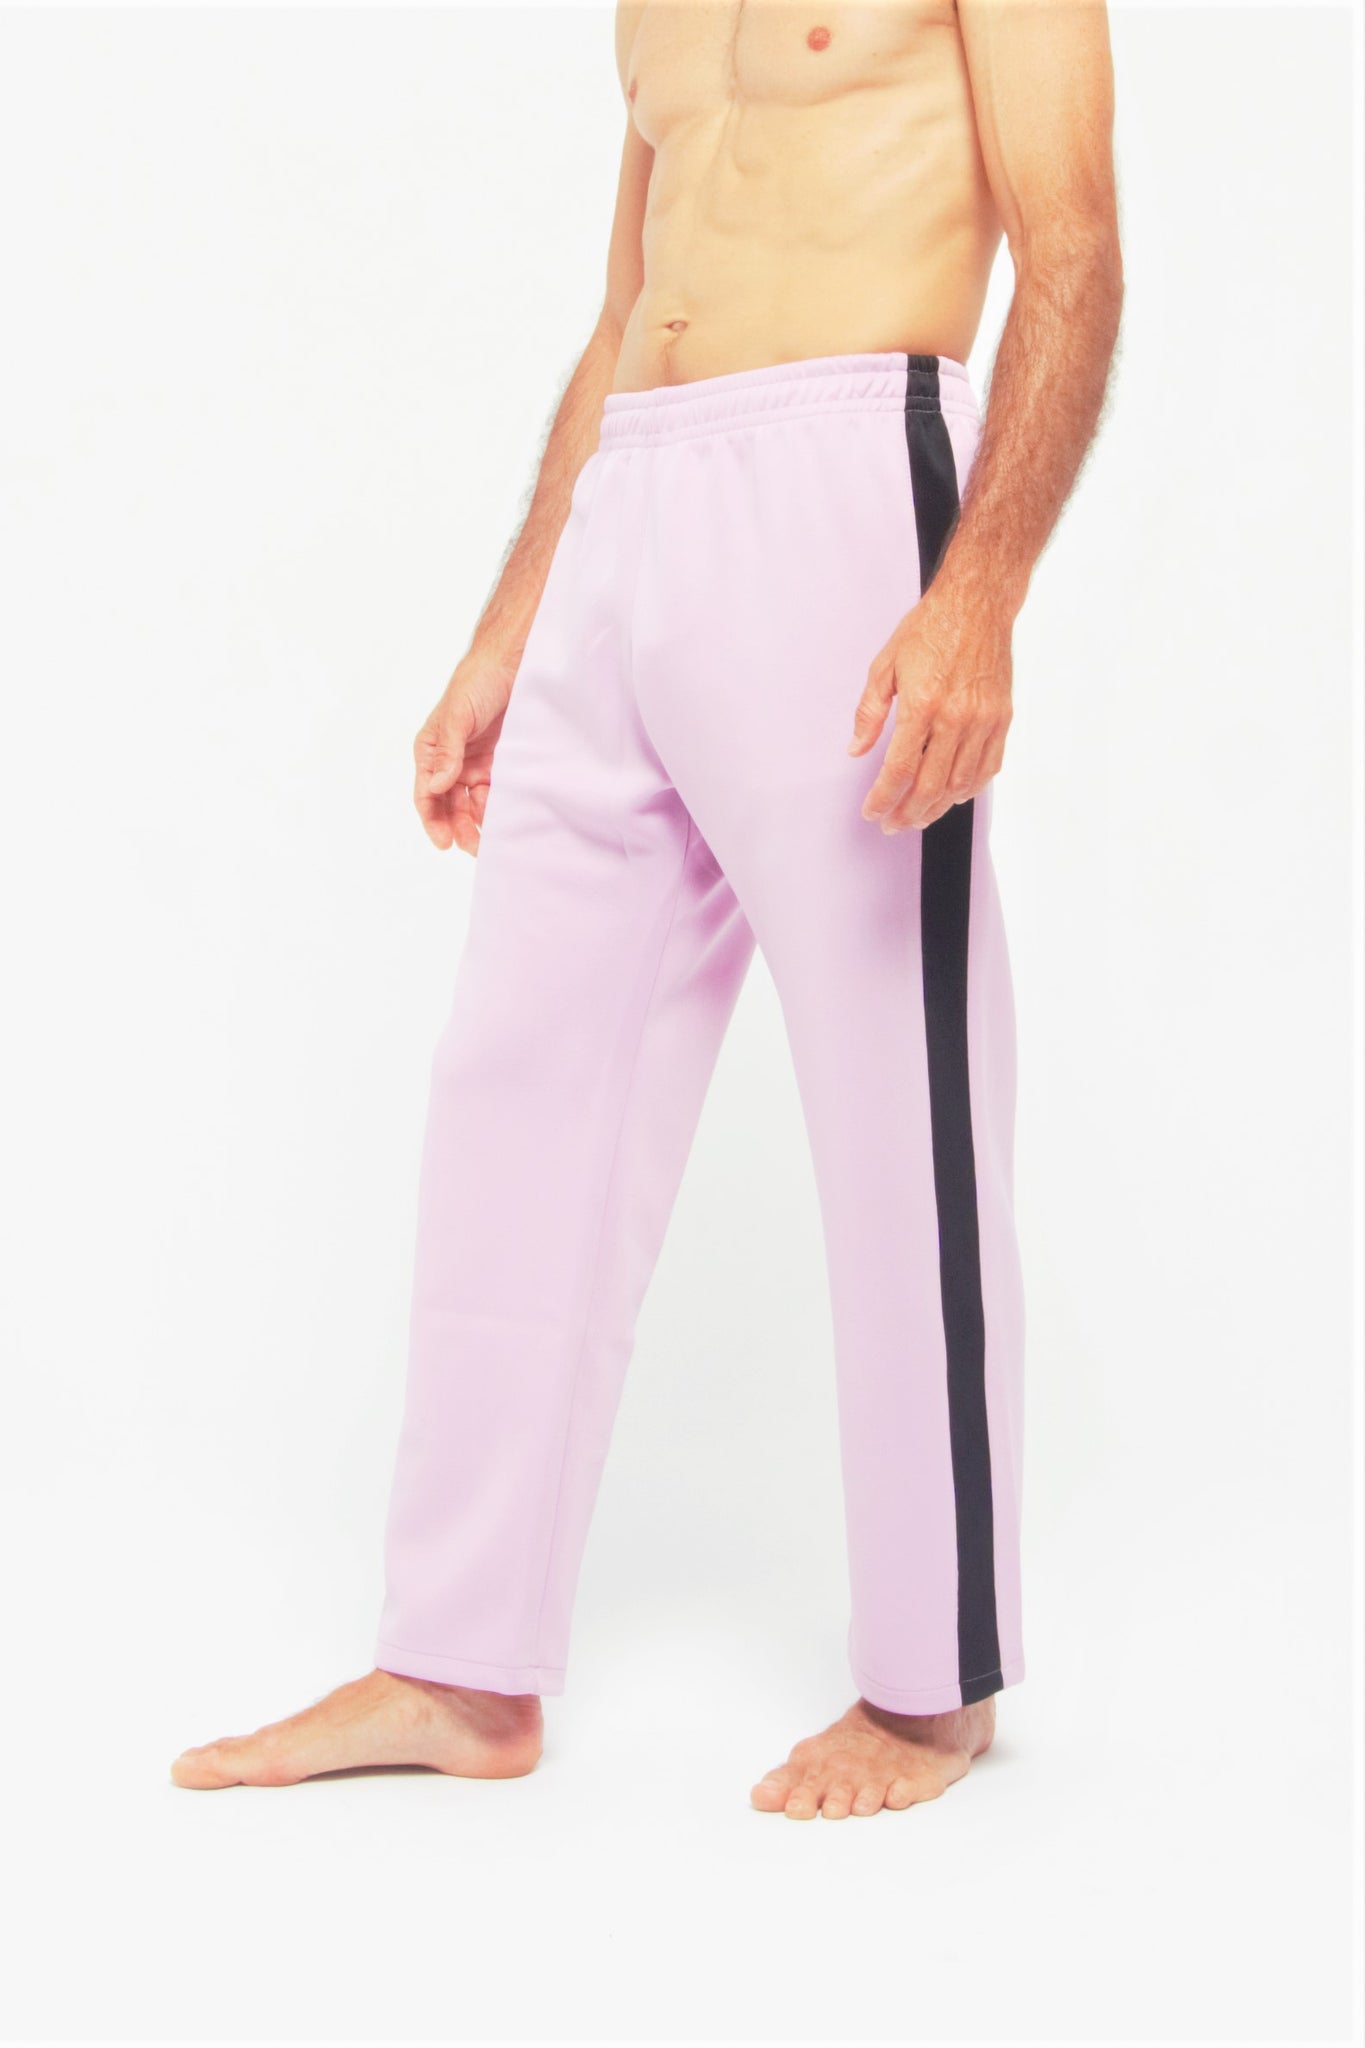 Flying Contemporary Dance Pants - Lila & Negro